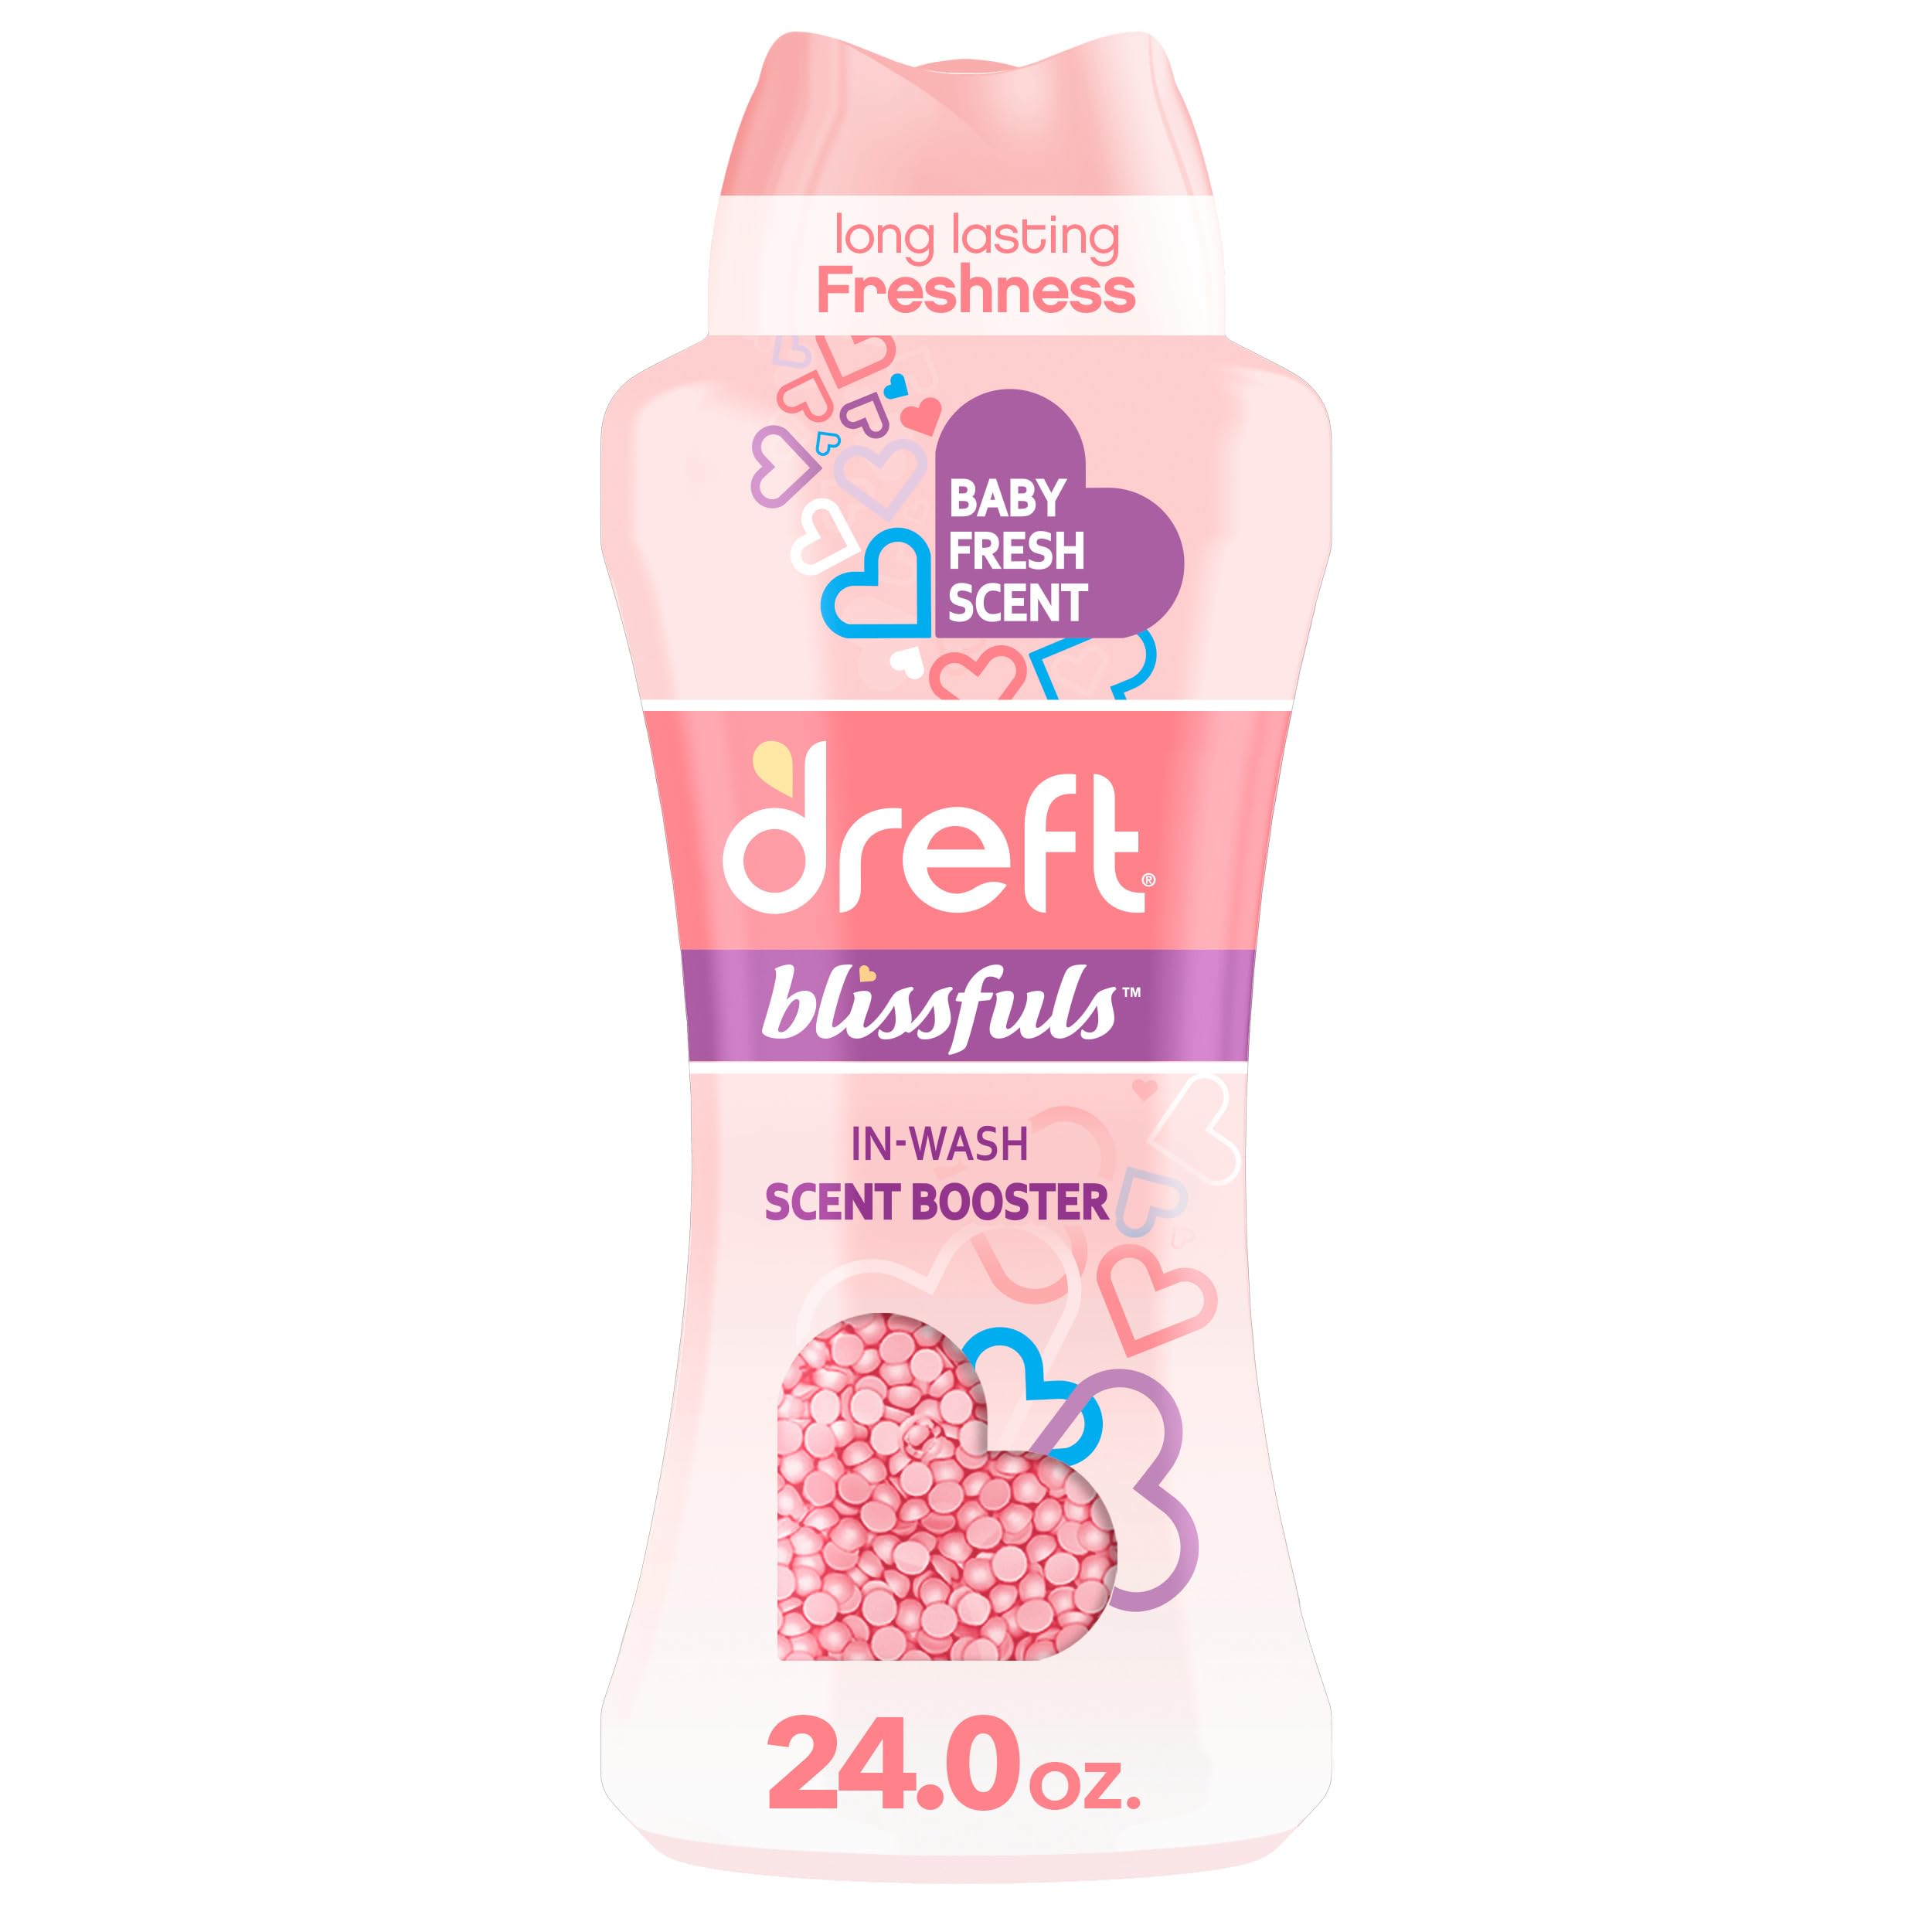 Dreft Blissfuls In-Wash Scent Booster Beads, Baby Fresh Scent, 24 oz